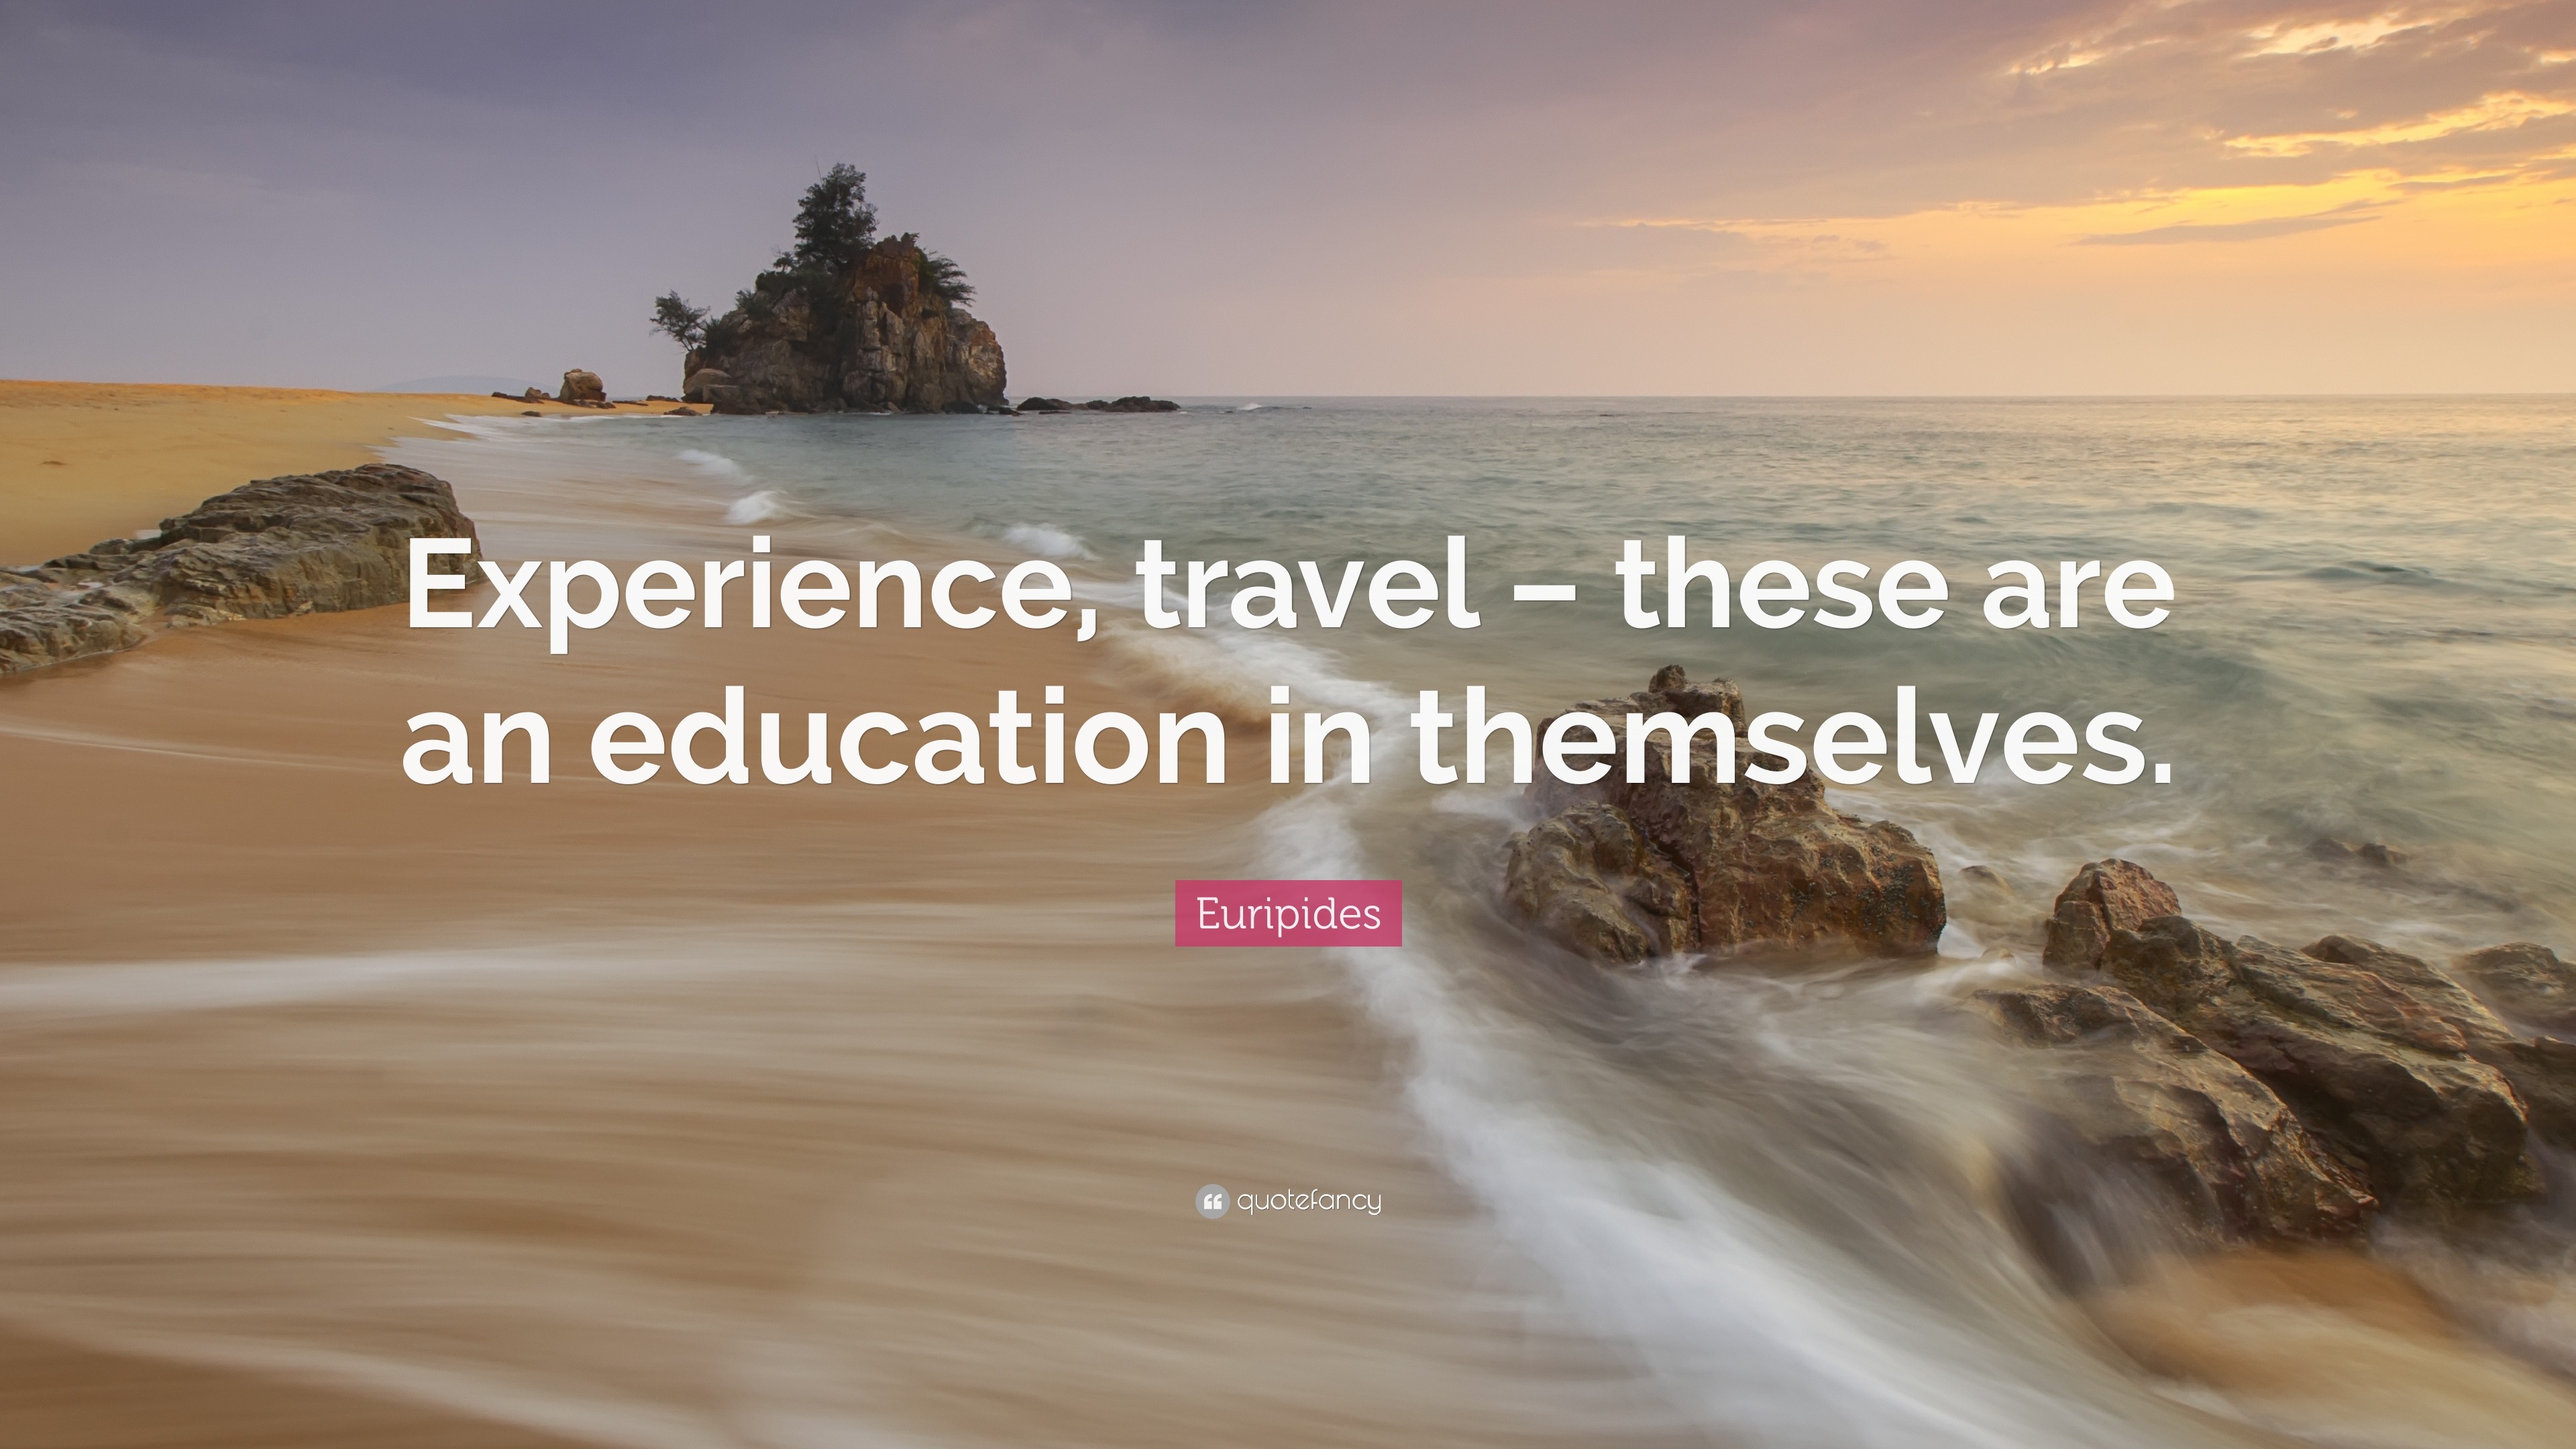 meaning of experience travel